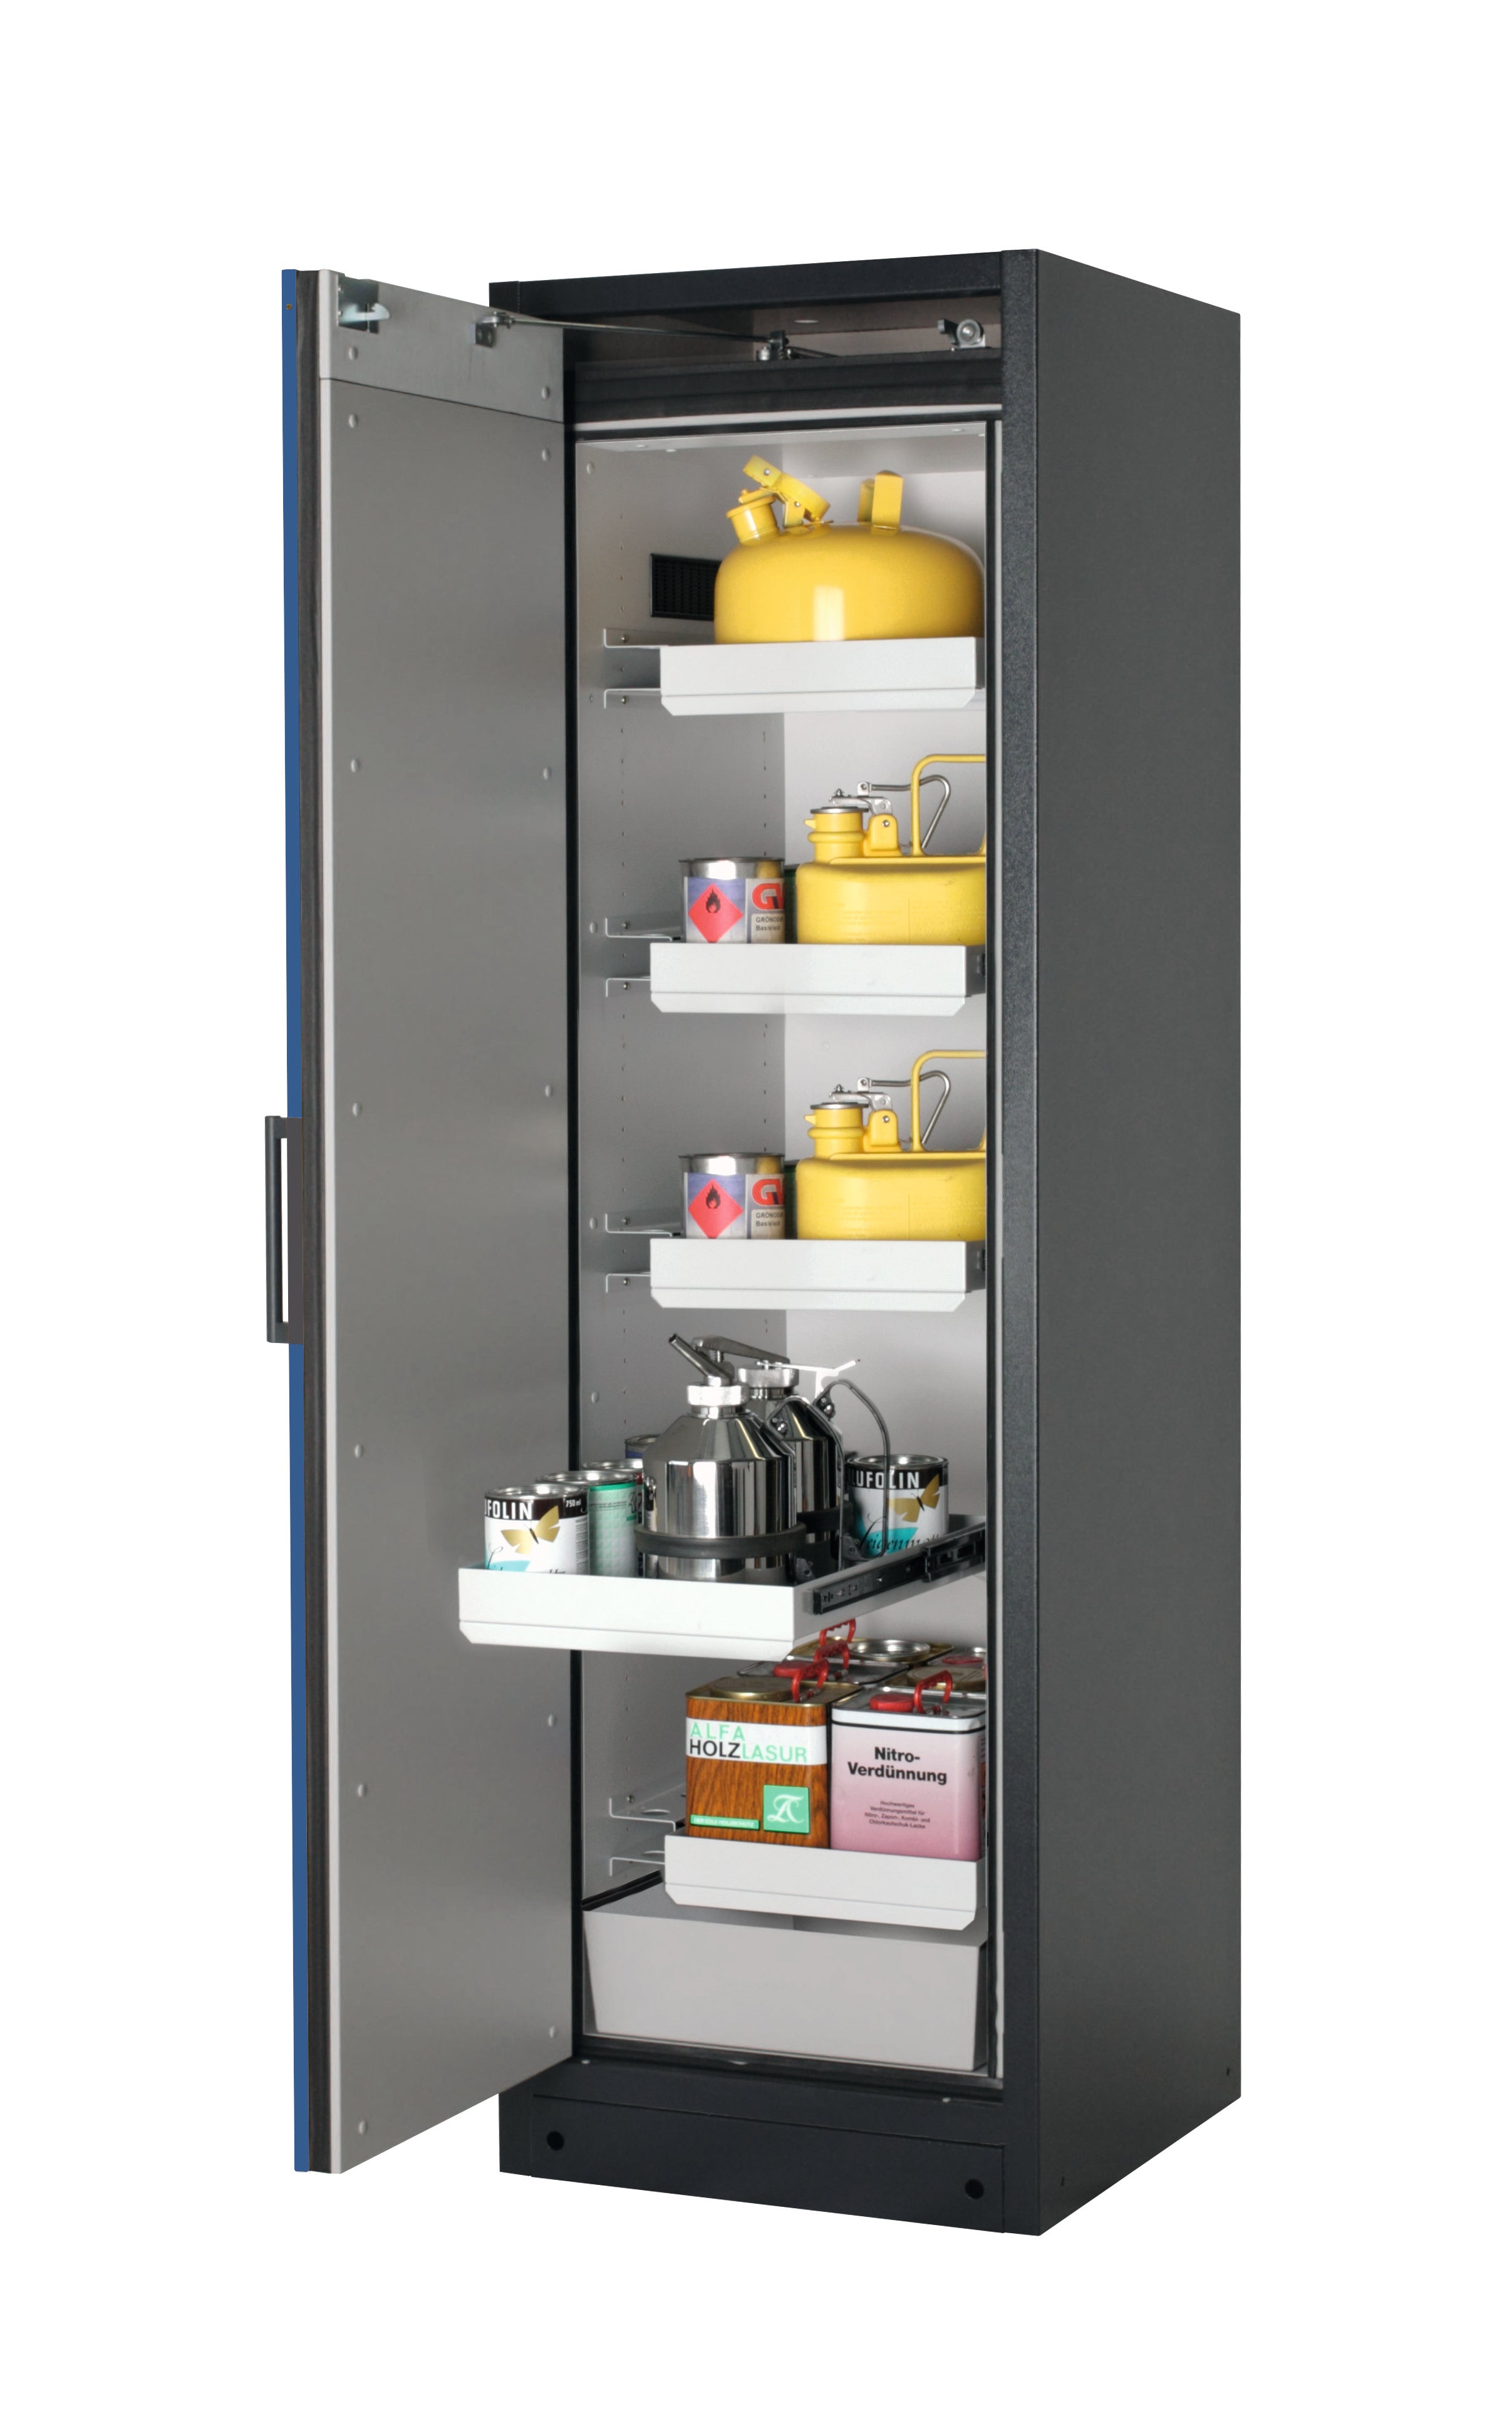 Type 90 safety storage cabinet Q-PEGASUS-90 model Q90.195.060.WDAC in gentian blue RAL 5010 with 4x drawer (standard) (sheet steel),